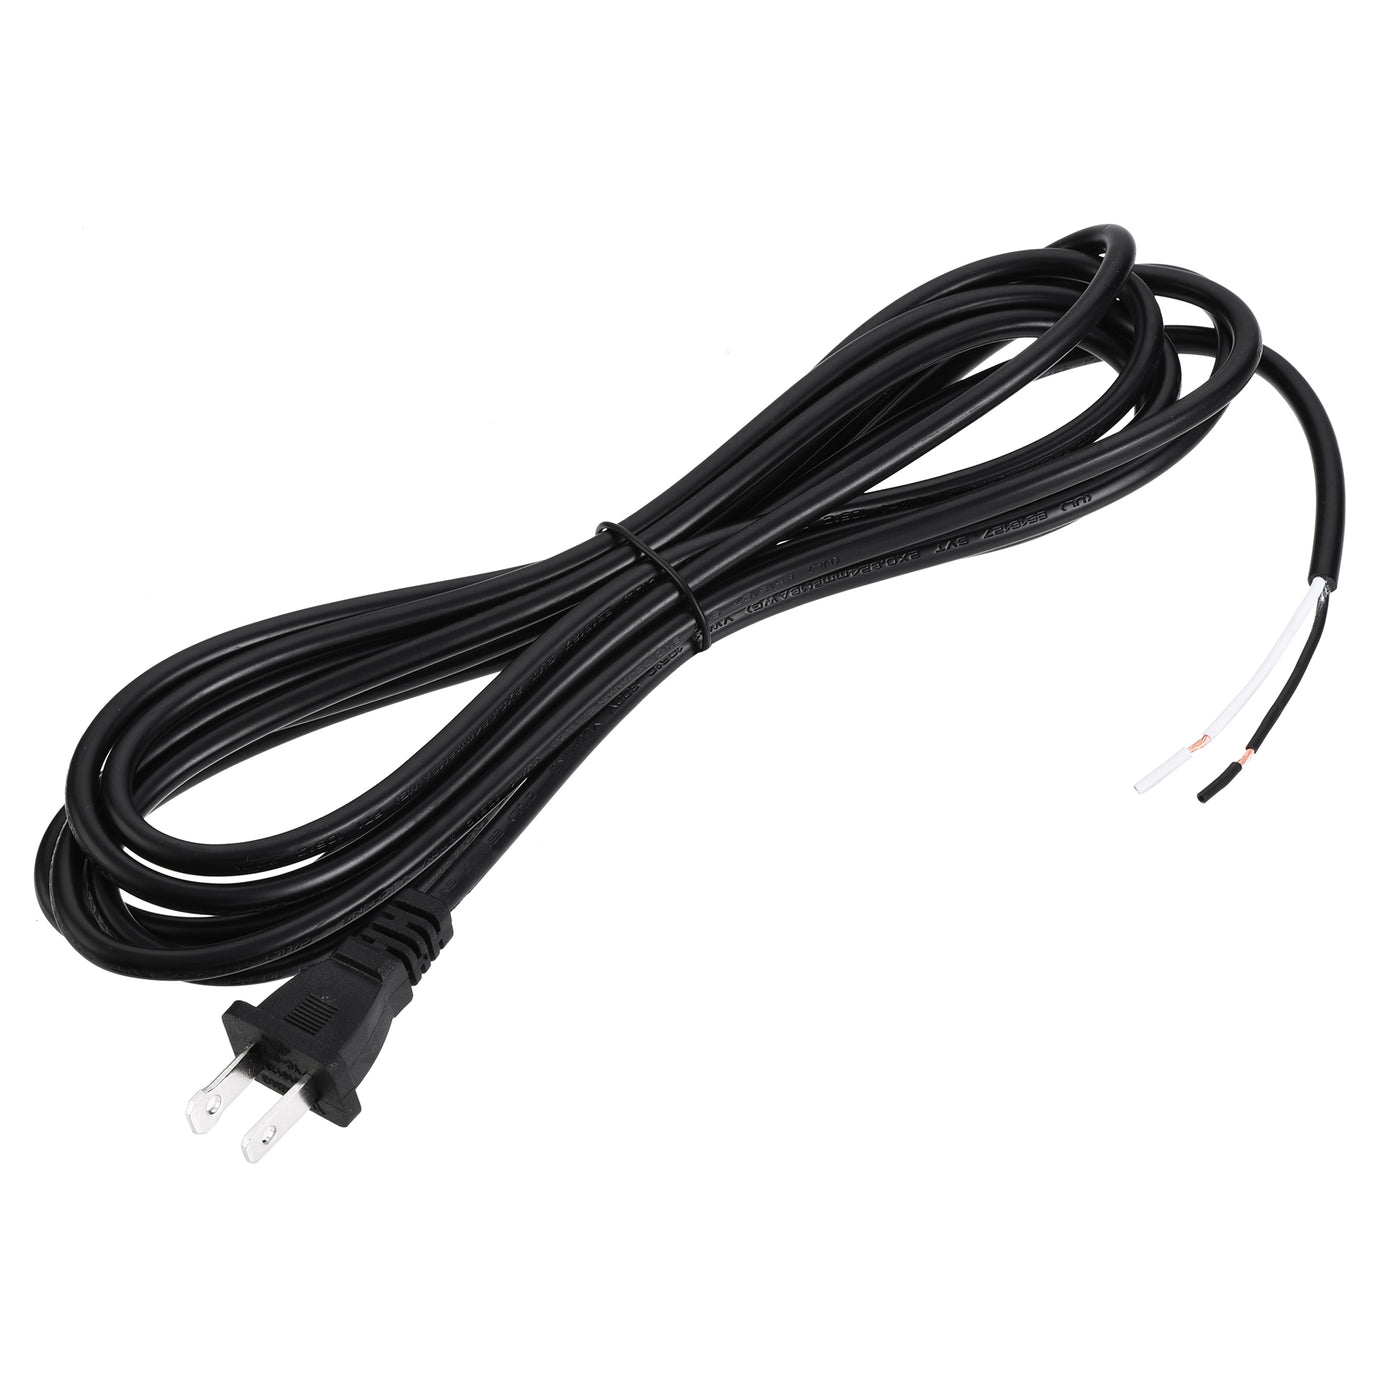 uxcell Uxcell US Plug Lamp Cord, SVT 18AWG Power Wire 3.5M Black, UL Listed, Replacement Lamp Repair Part